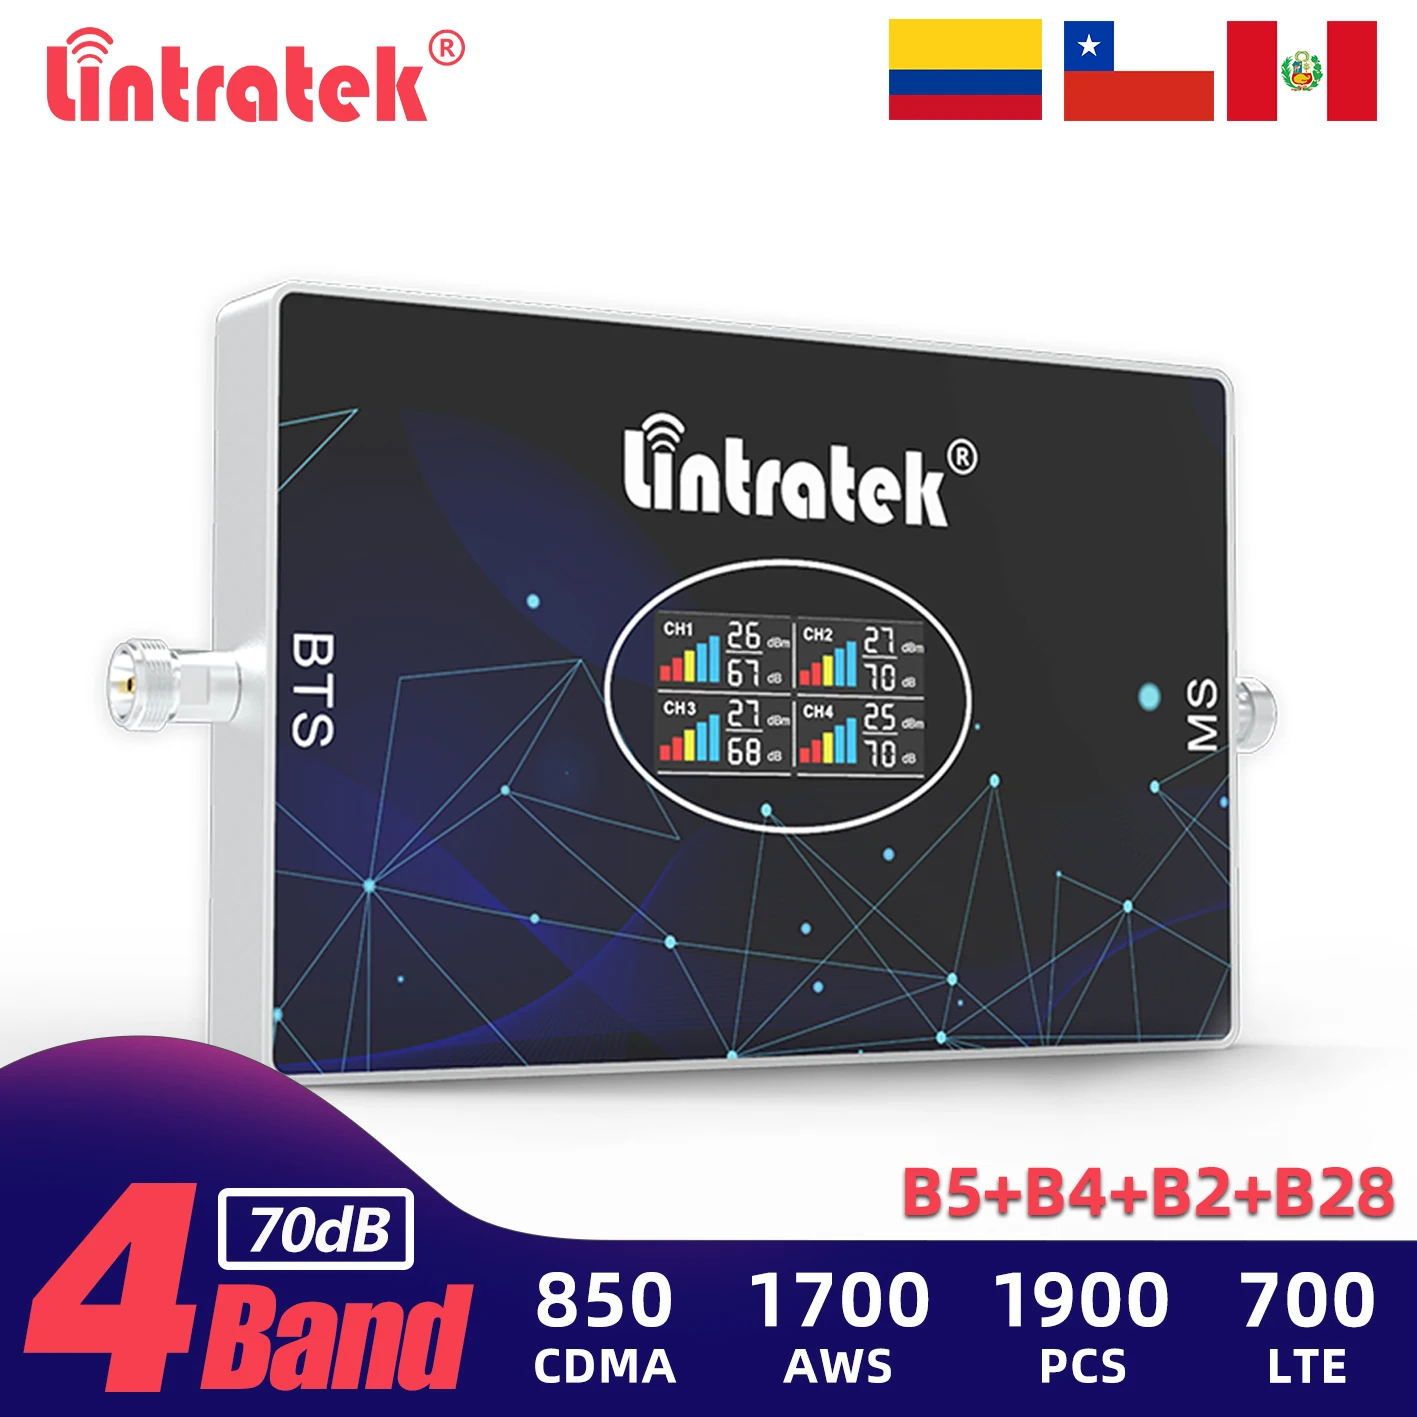 Lintratek Four-Band Signal Repeater 850 700 1900 1700 Band 28 Cellular Booster 2G GSM 3G 4G LTE Cell Phone Network Amplifier wholesale 2g 3g 4g mobile signal booster cell phone signal repeater amplifier 900 1800 2100mhz tri band lte gsm booster